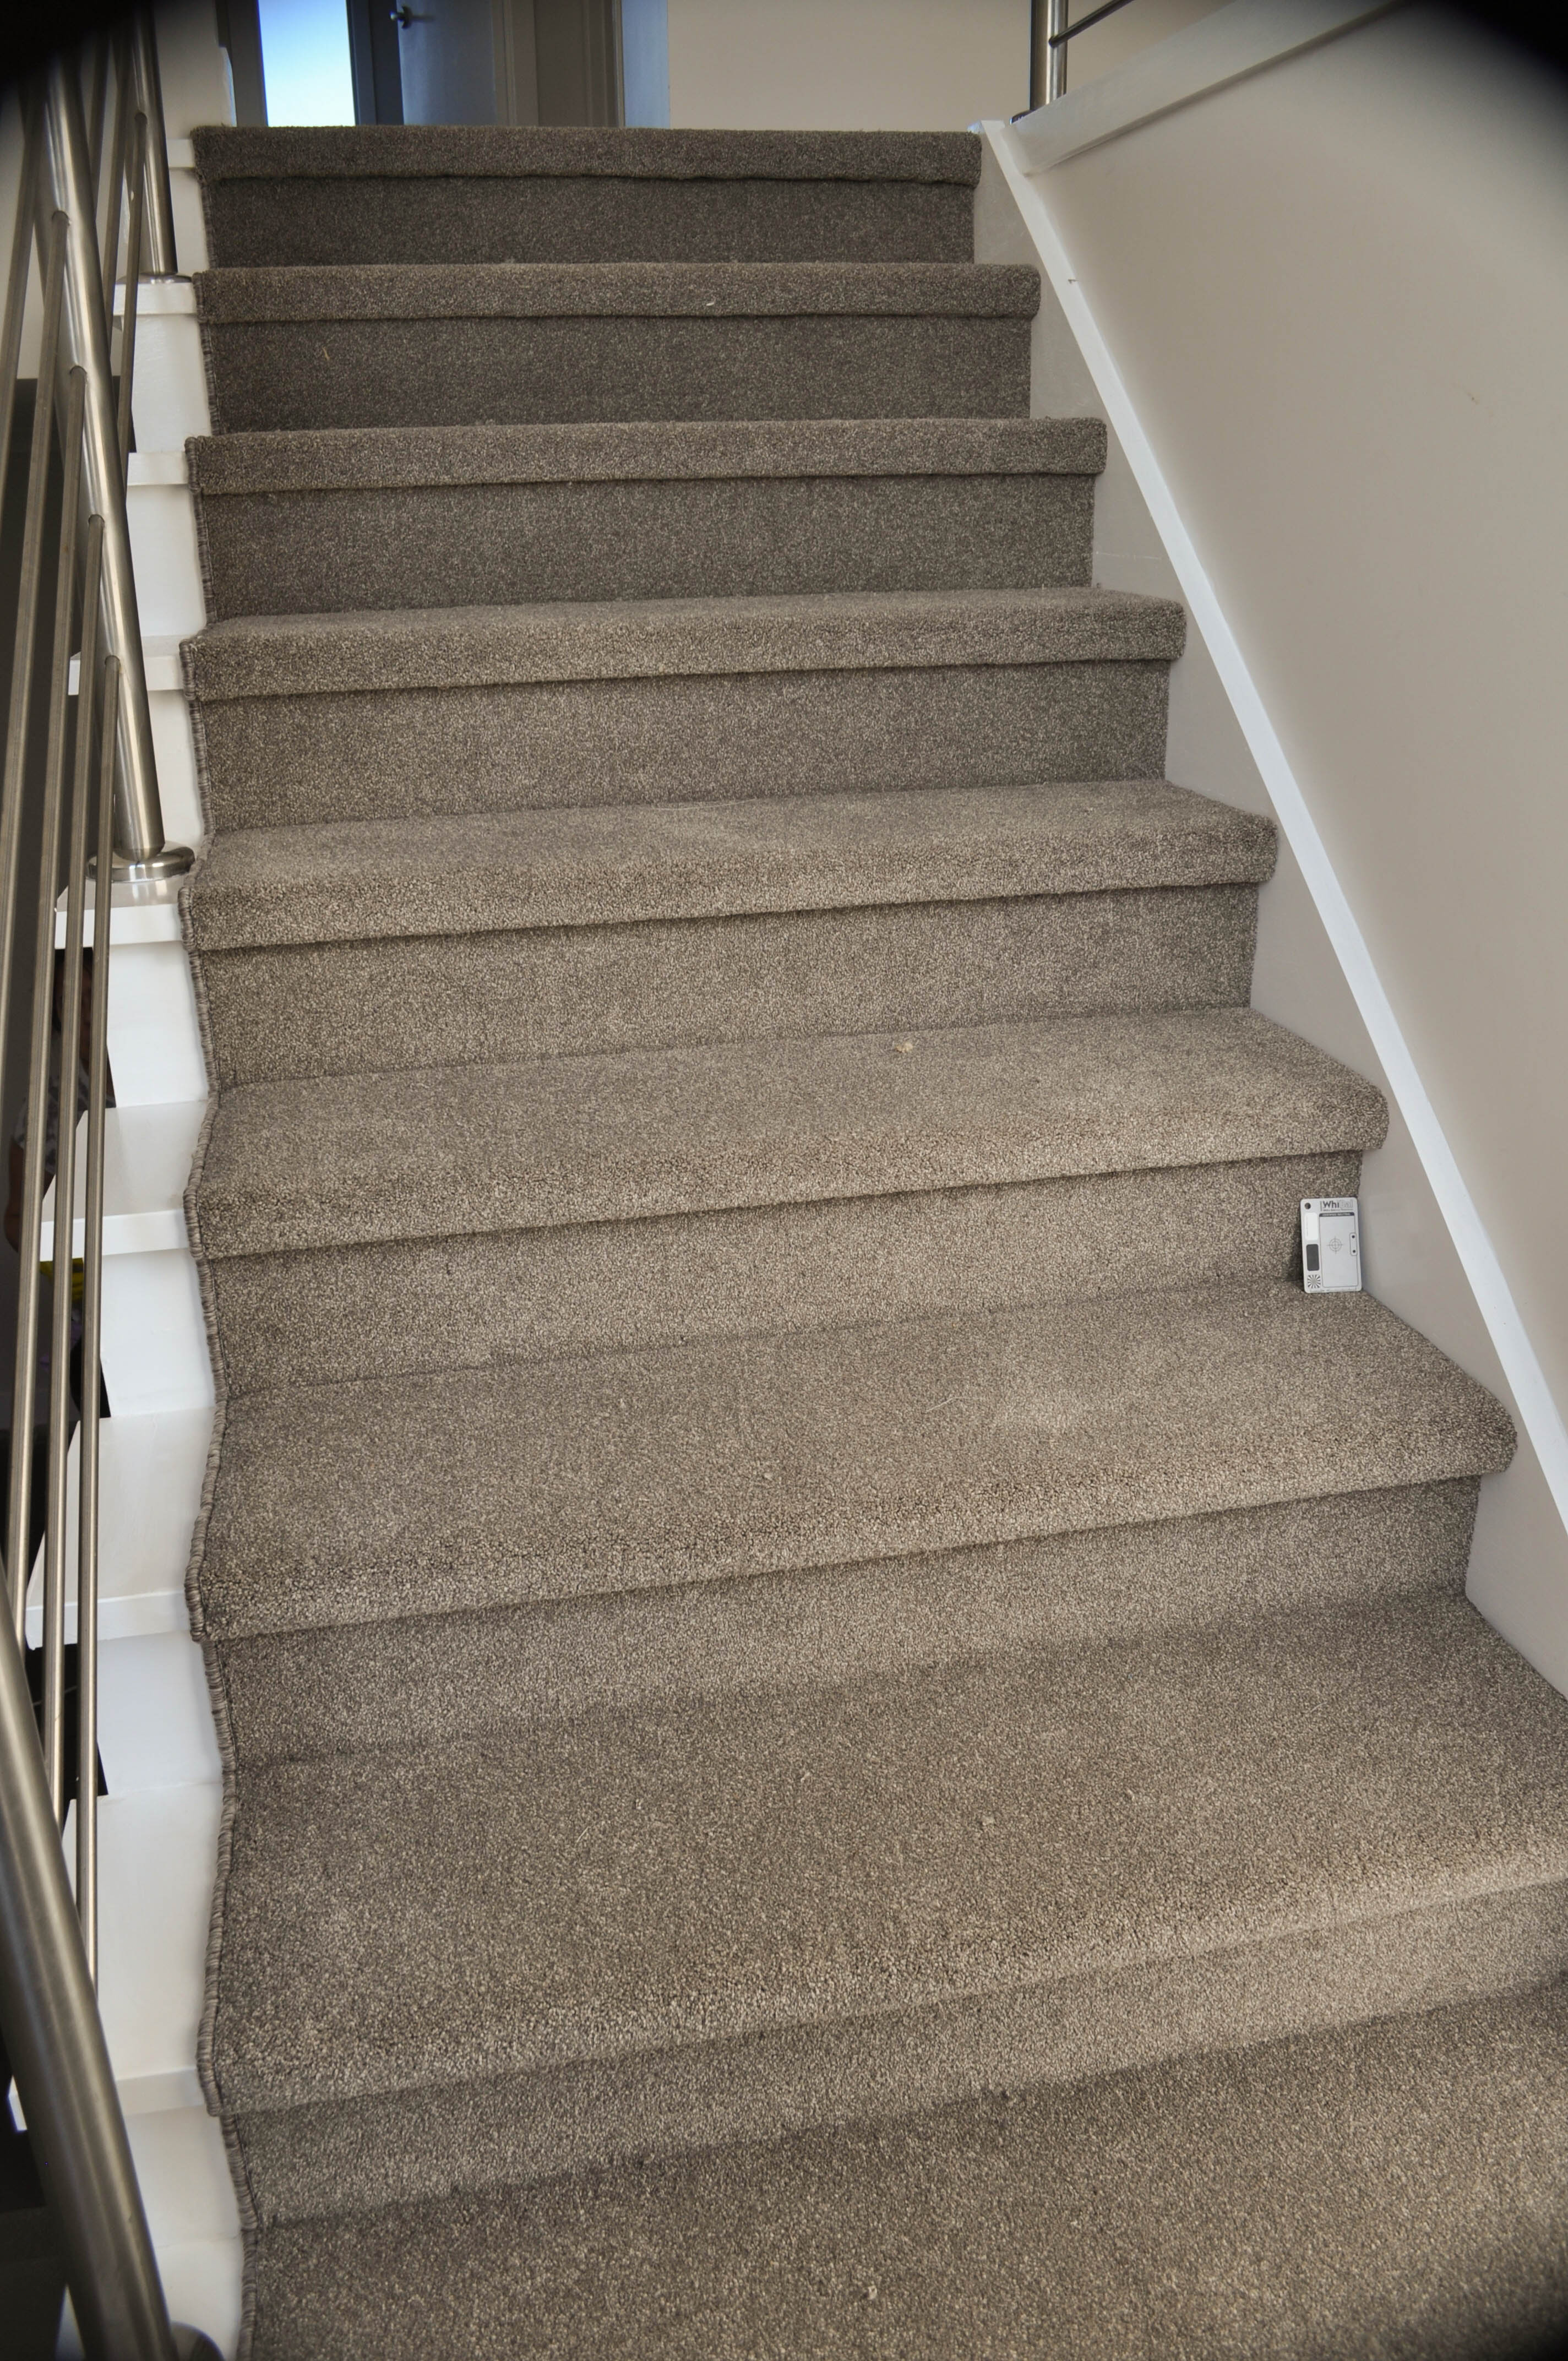 showing a staircase with charcoal colored carpet installed on it.